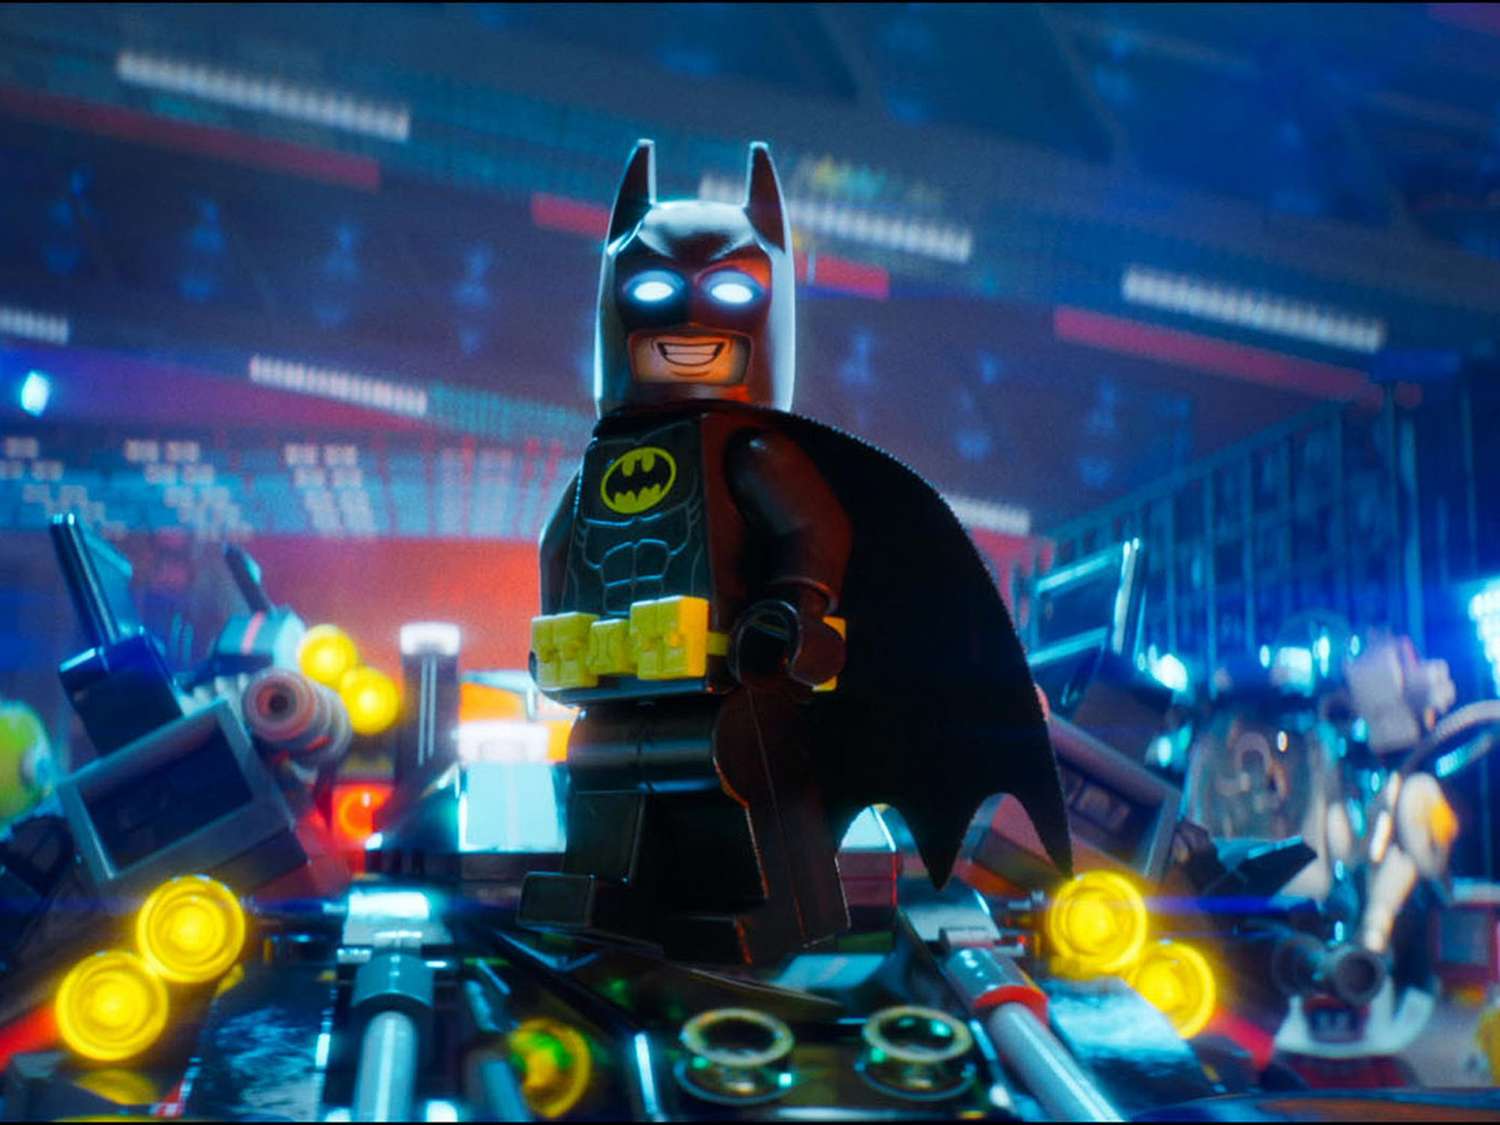 Box office: 'LEGO Batman' scales 'The Great Wall' for top spot 